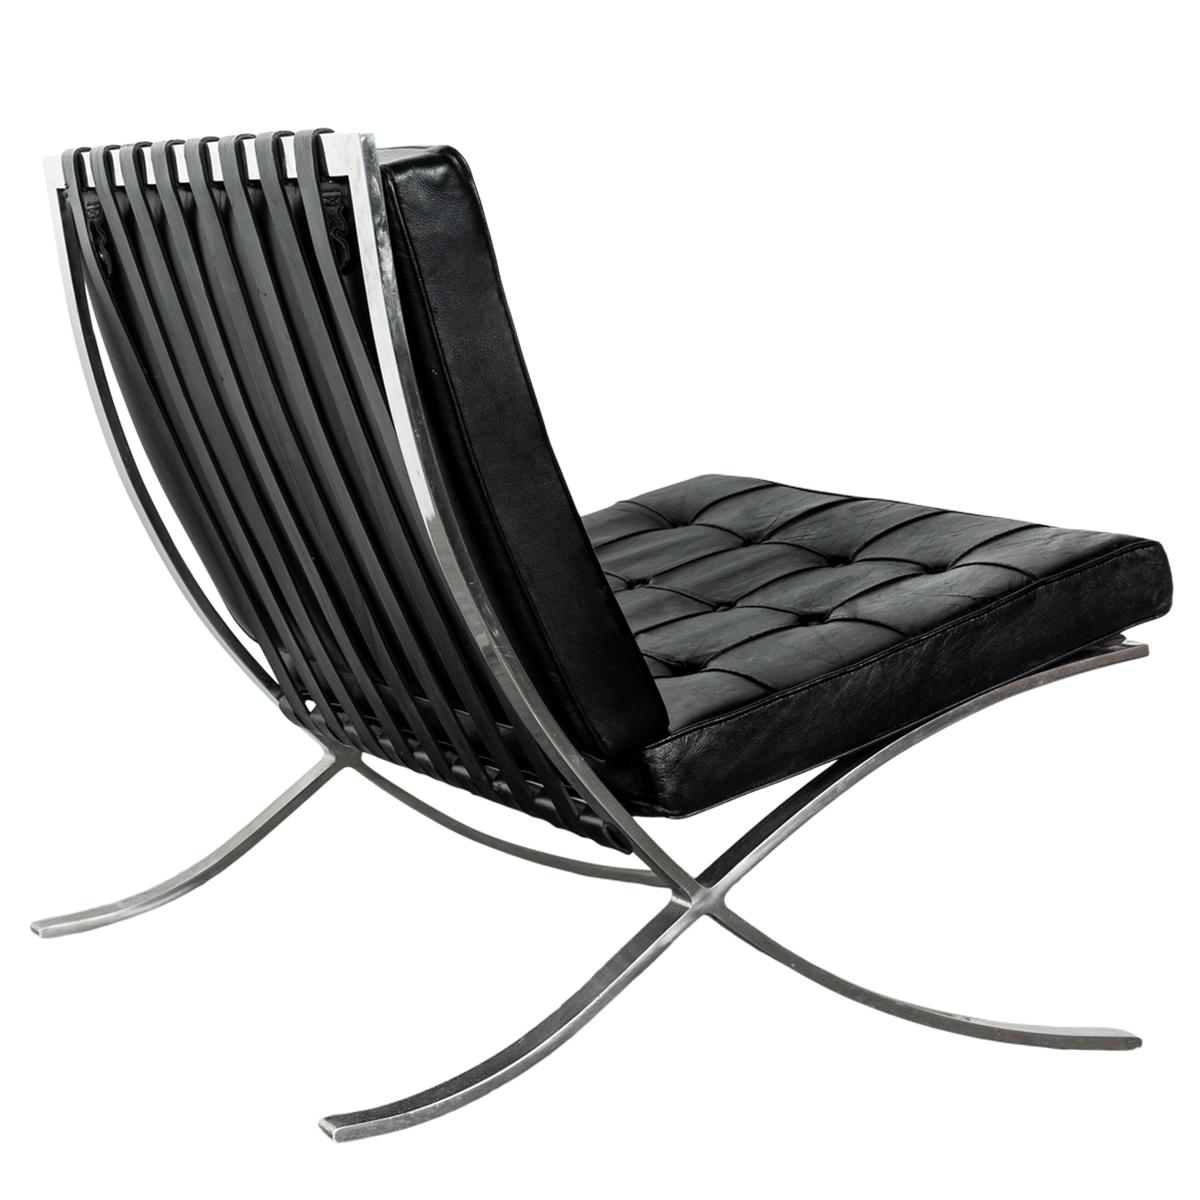 Early Pair MCM Knoll Barcelona Chairs Black Leather Mies van der Rohe 1961 For Sale 3